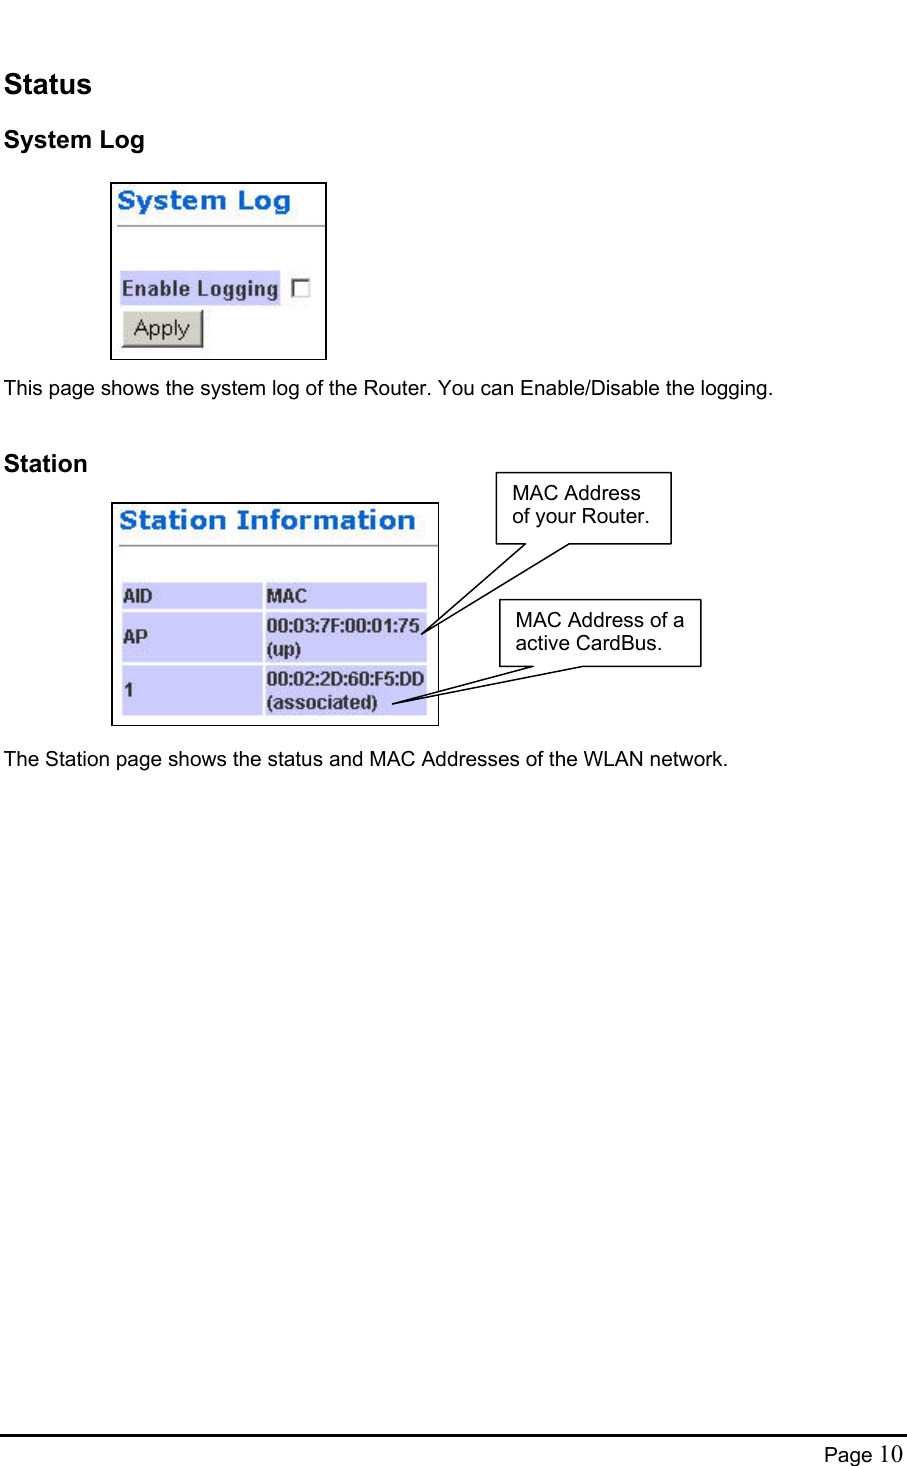  Status System Log          This page shows the system log of the Router. You can Enable/Disable the logging.  Station MAC Address of a active CardBus. MAC Address of your Router.           The Station page shows the status and MAC Addresses of the WLAN network.  Page 10 